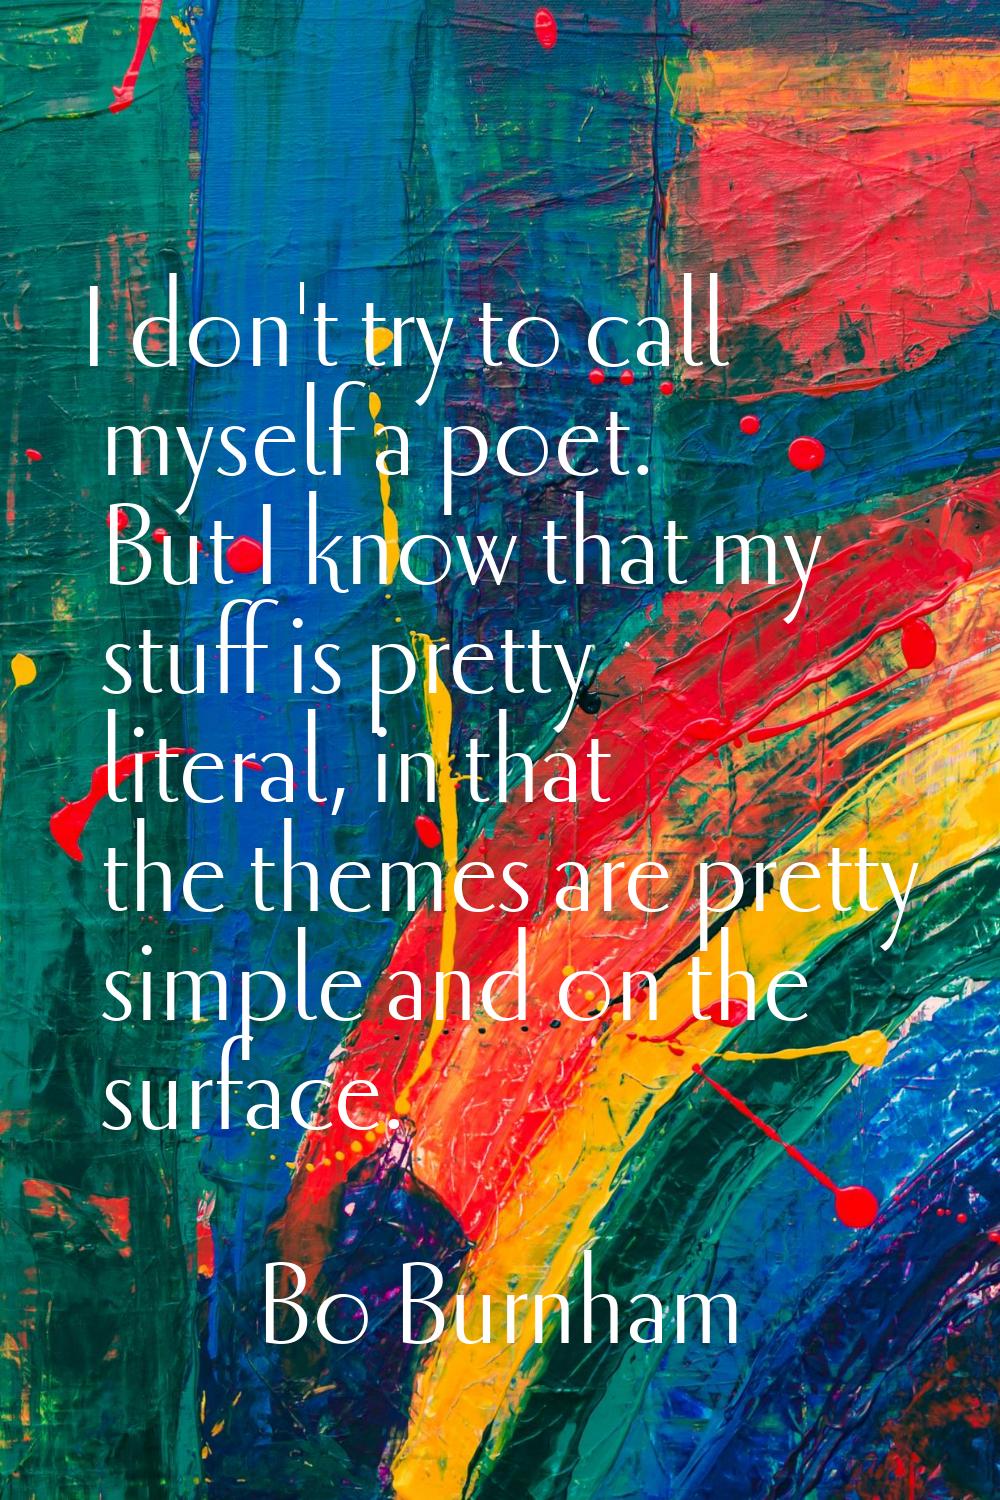 I don't try to call myself a poet. But I know that my stuff is pretty literal, in that the themes a